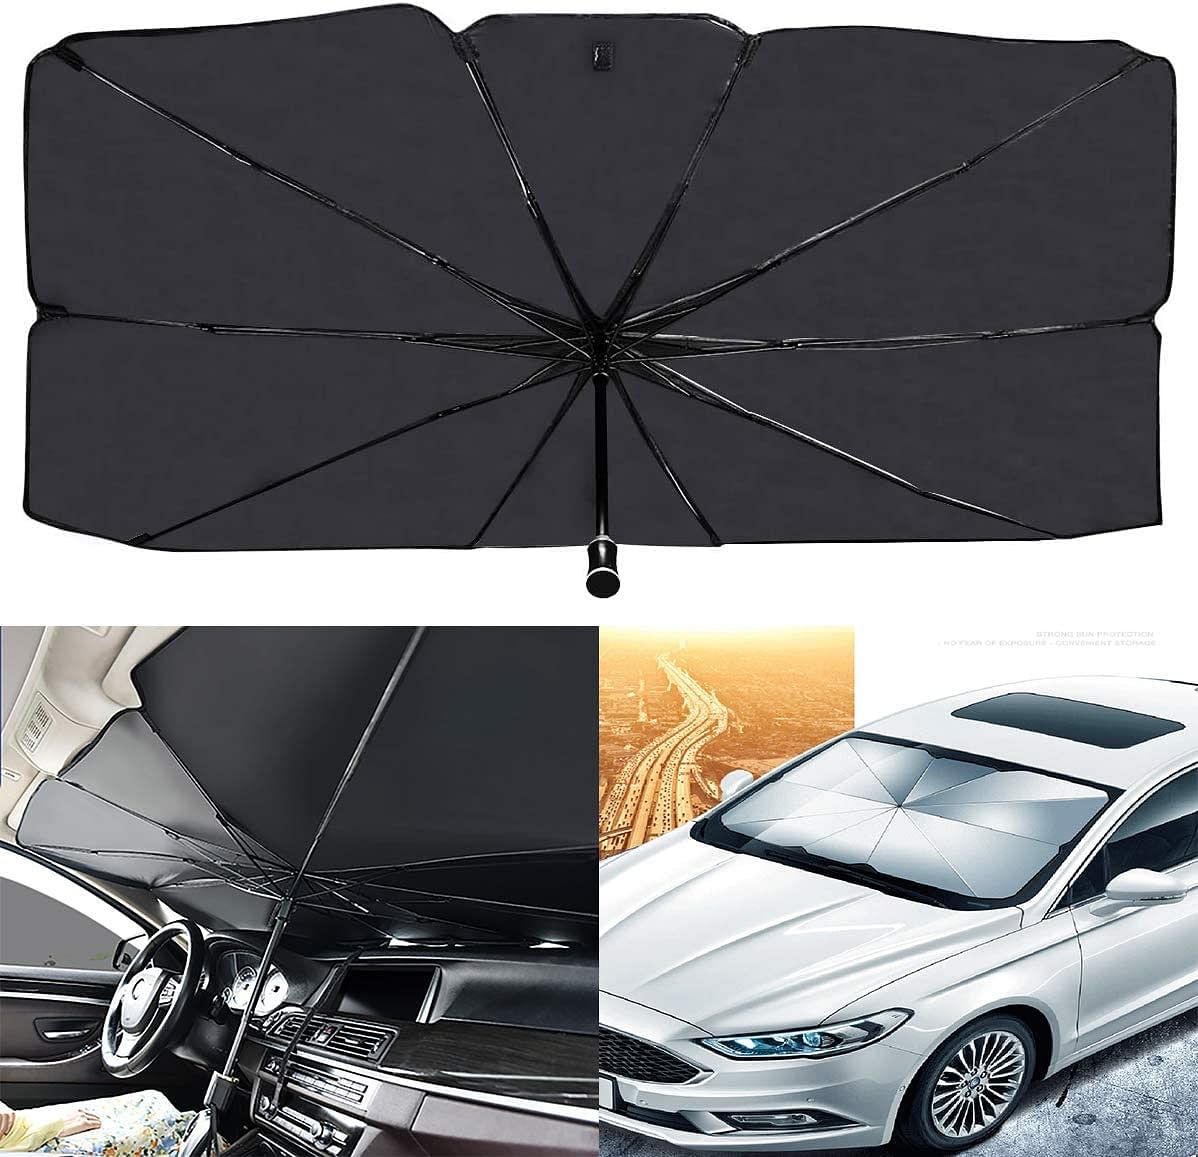 Carsto - Car Sunshade Windshield Umbrella with Thermal Insulation